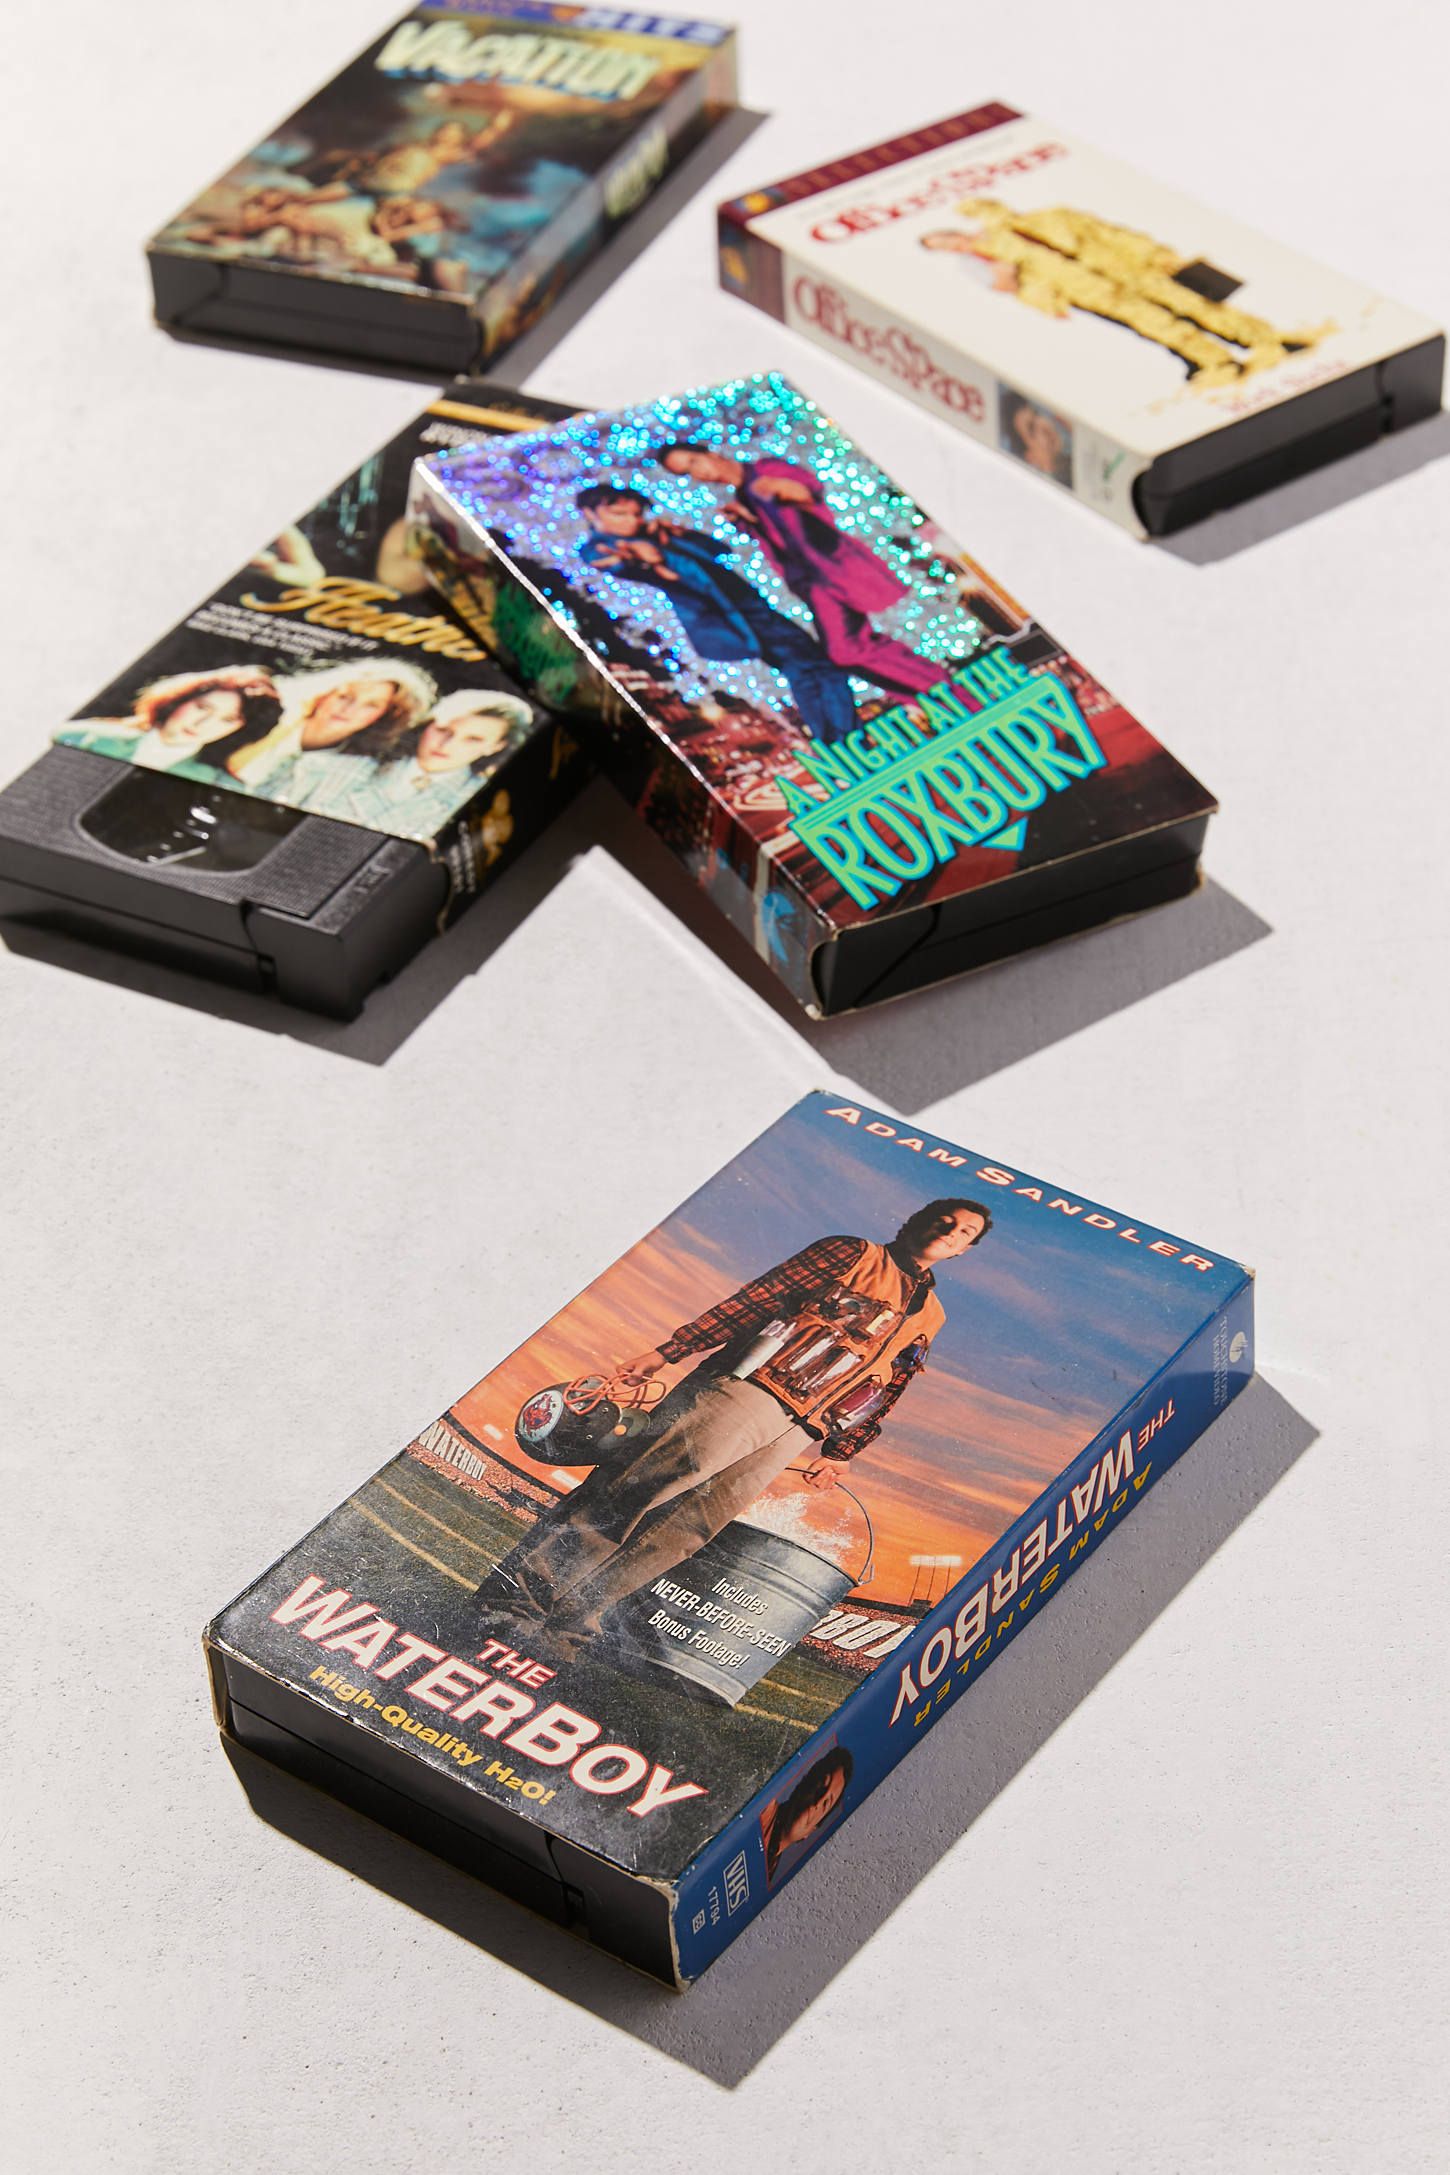 Urban Outfitters Is Now Selling Used Vhs Tapes - 